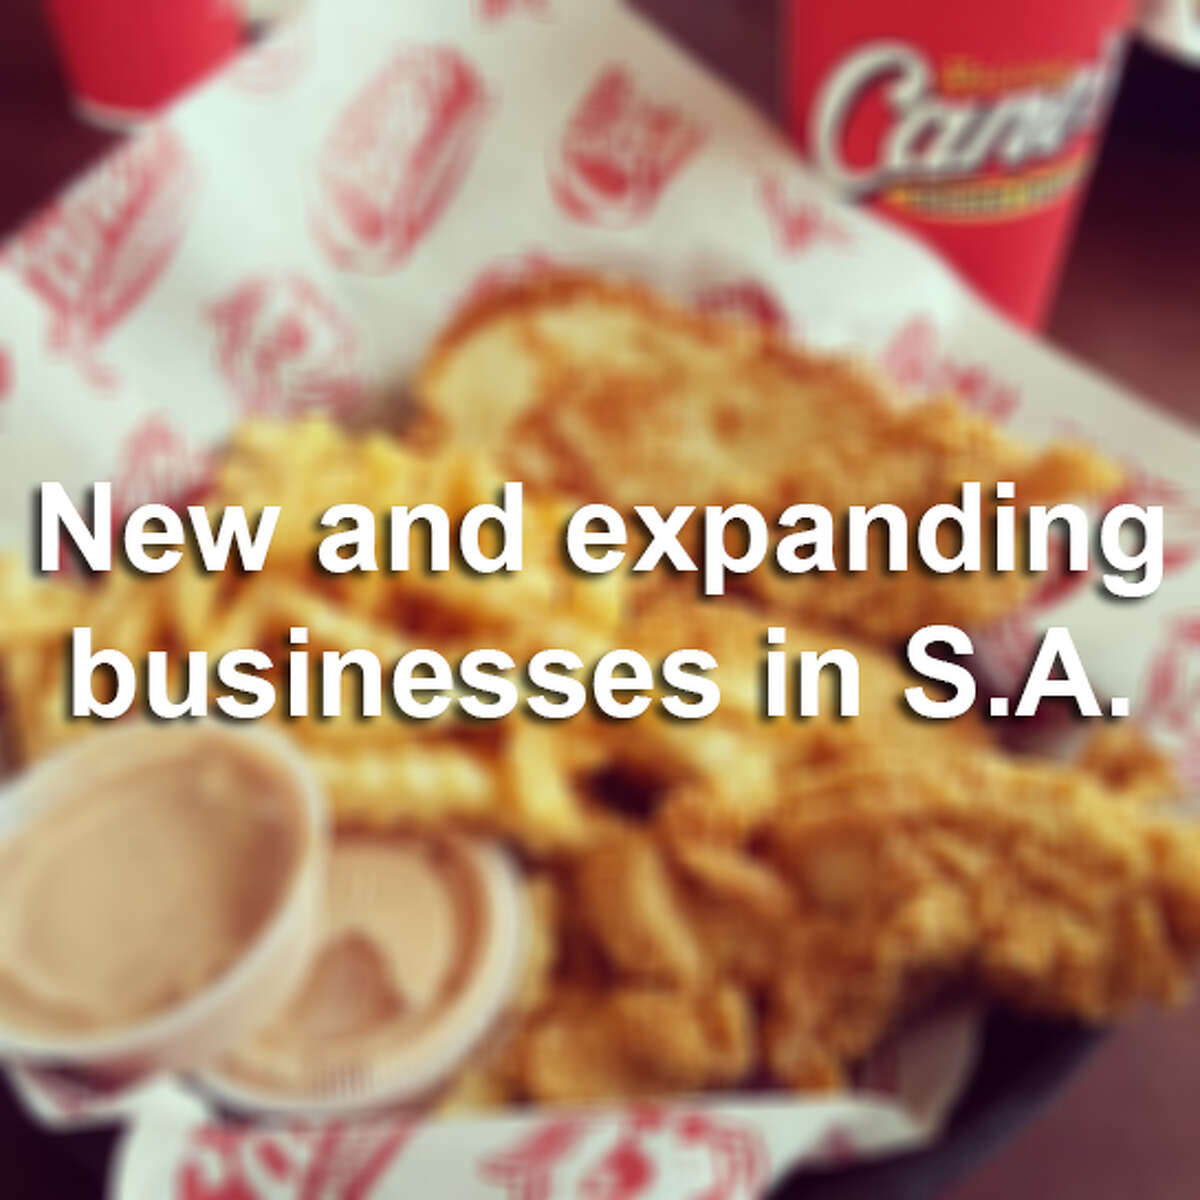 From restaurants and bars to retail and gyms, click through the gallery to see which businesses are entering or expanding in San Antonio.